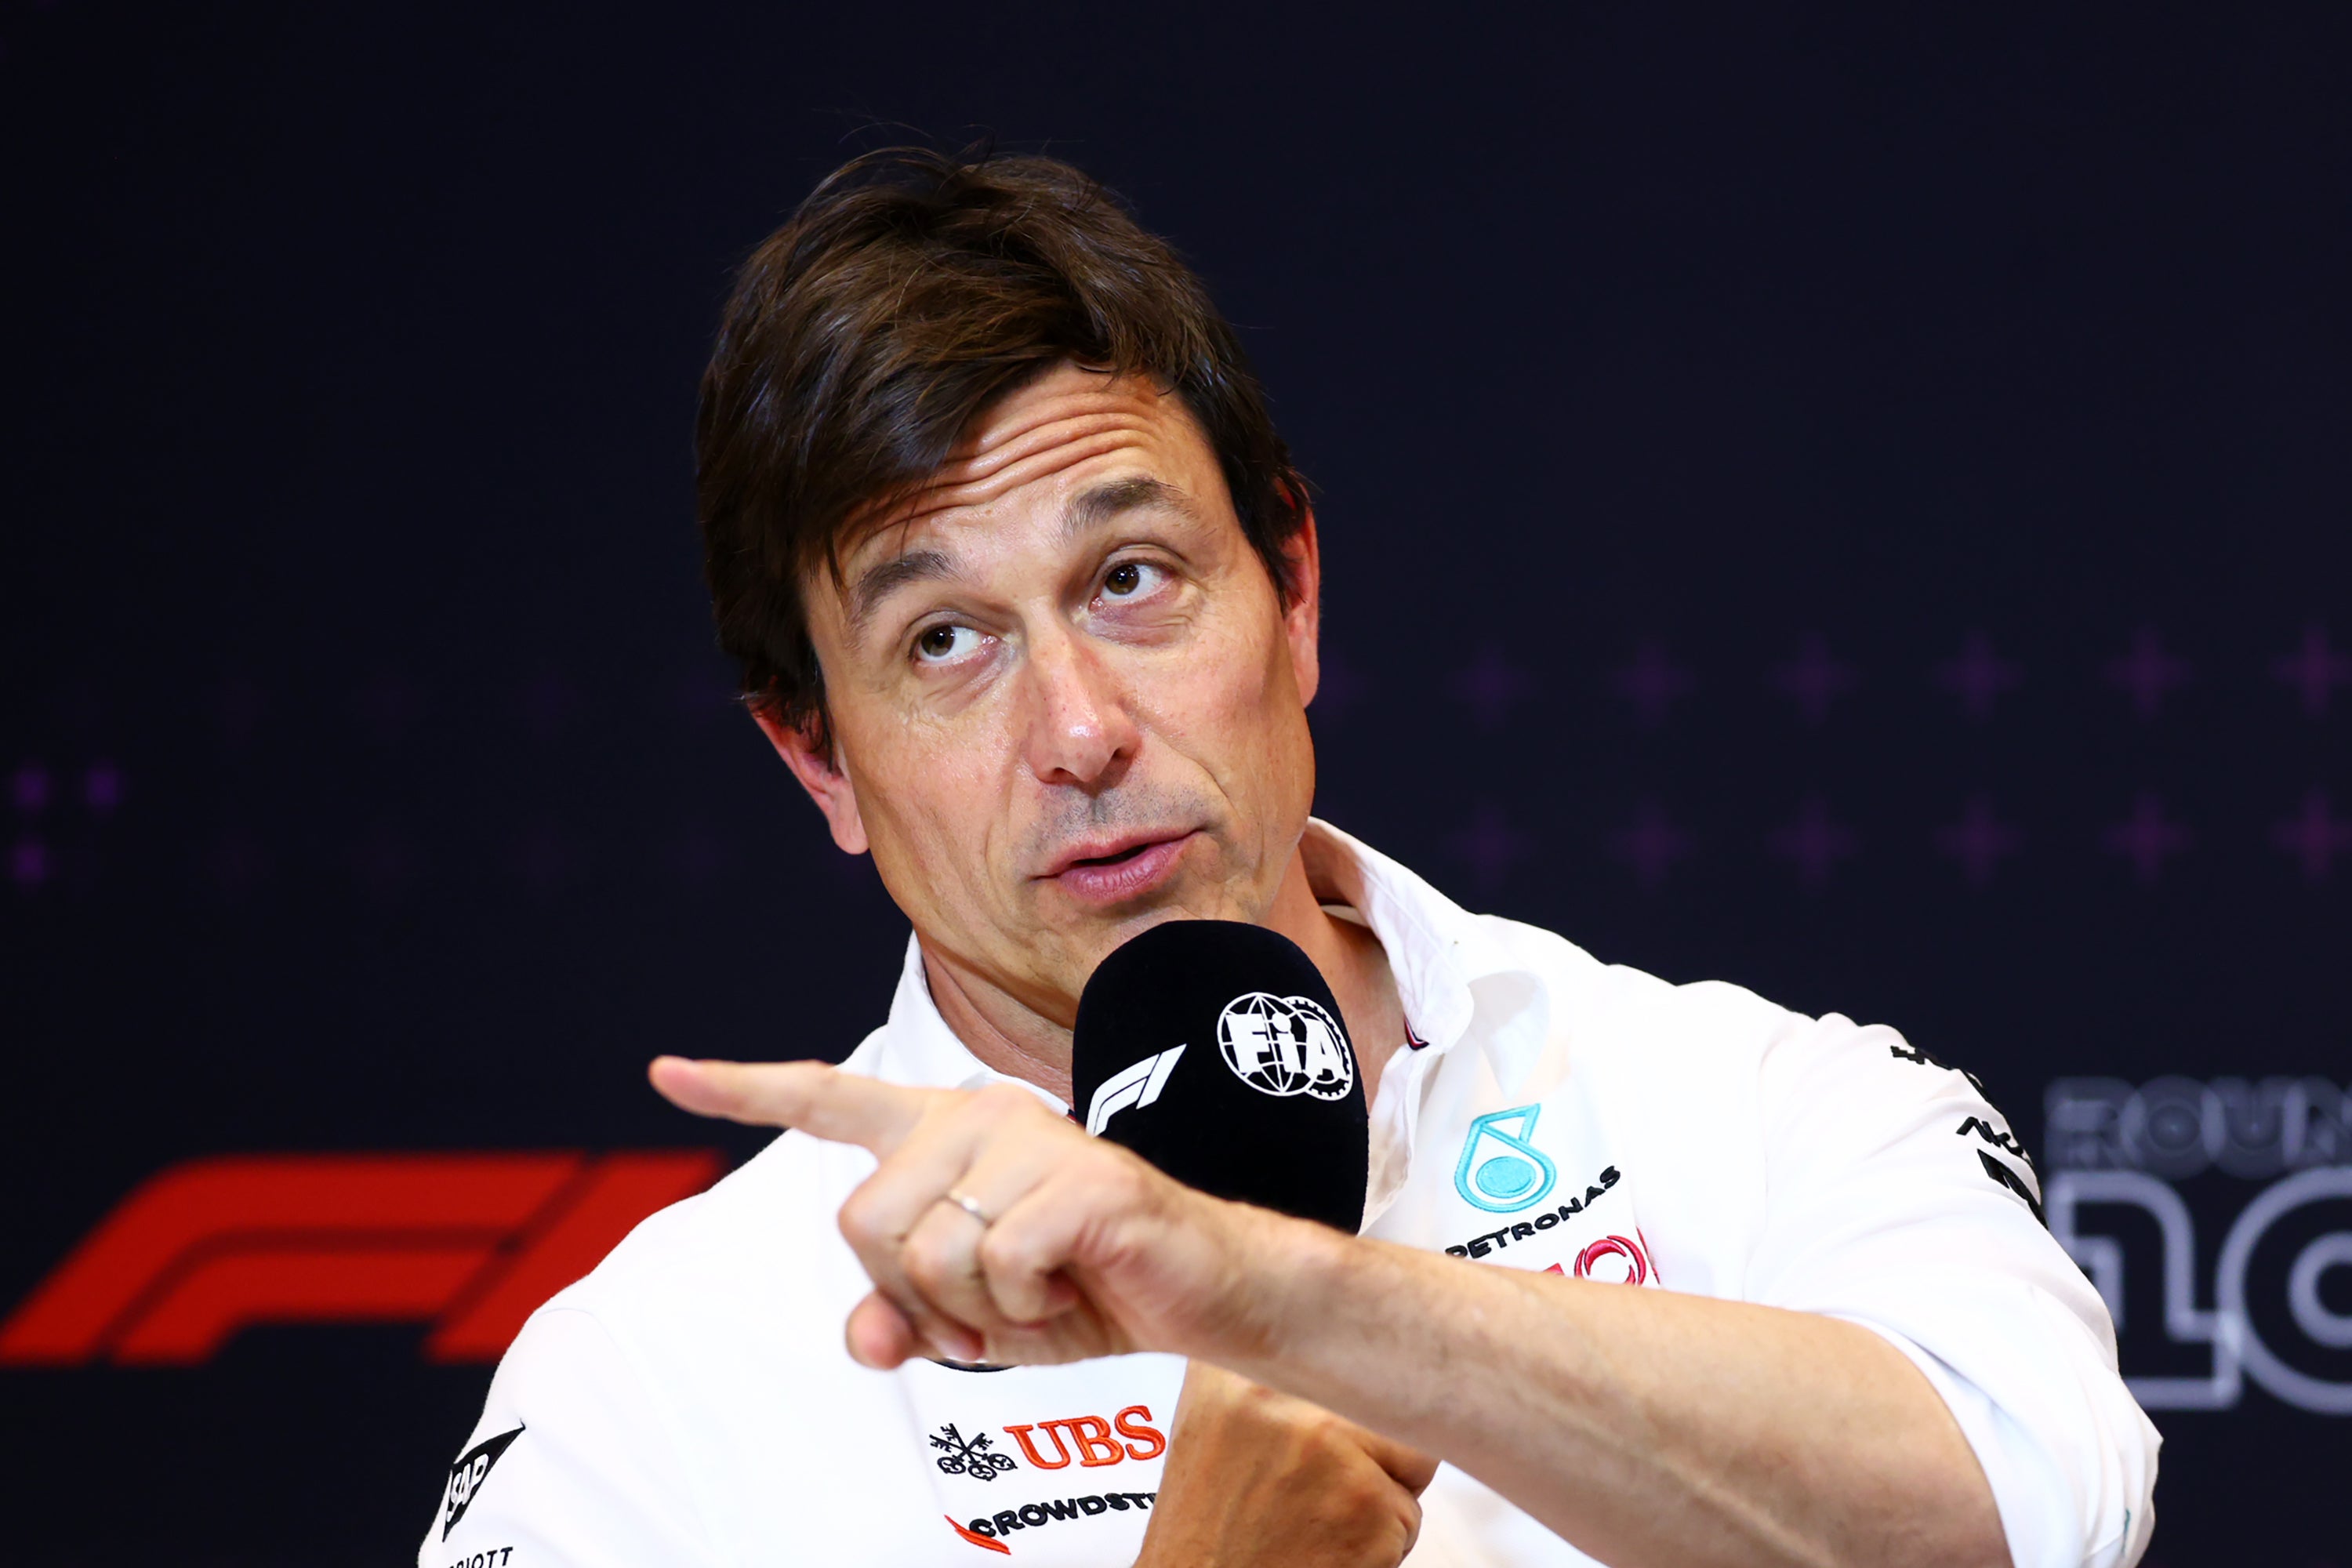 Toto Wolff’s Mercedes team have reported an anonymous email to the police